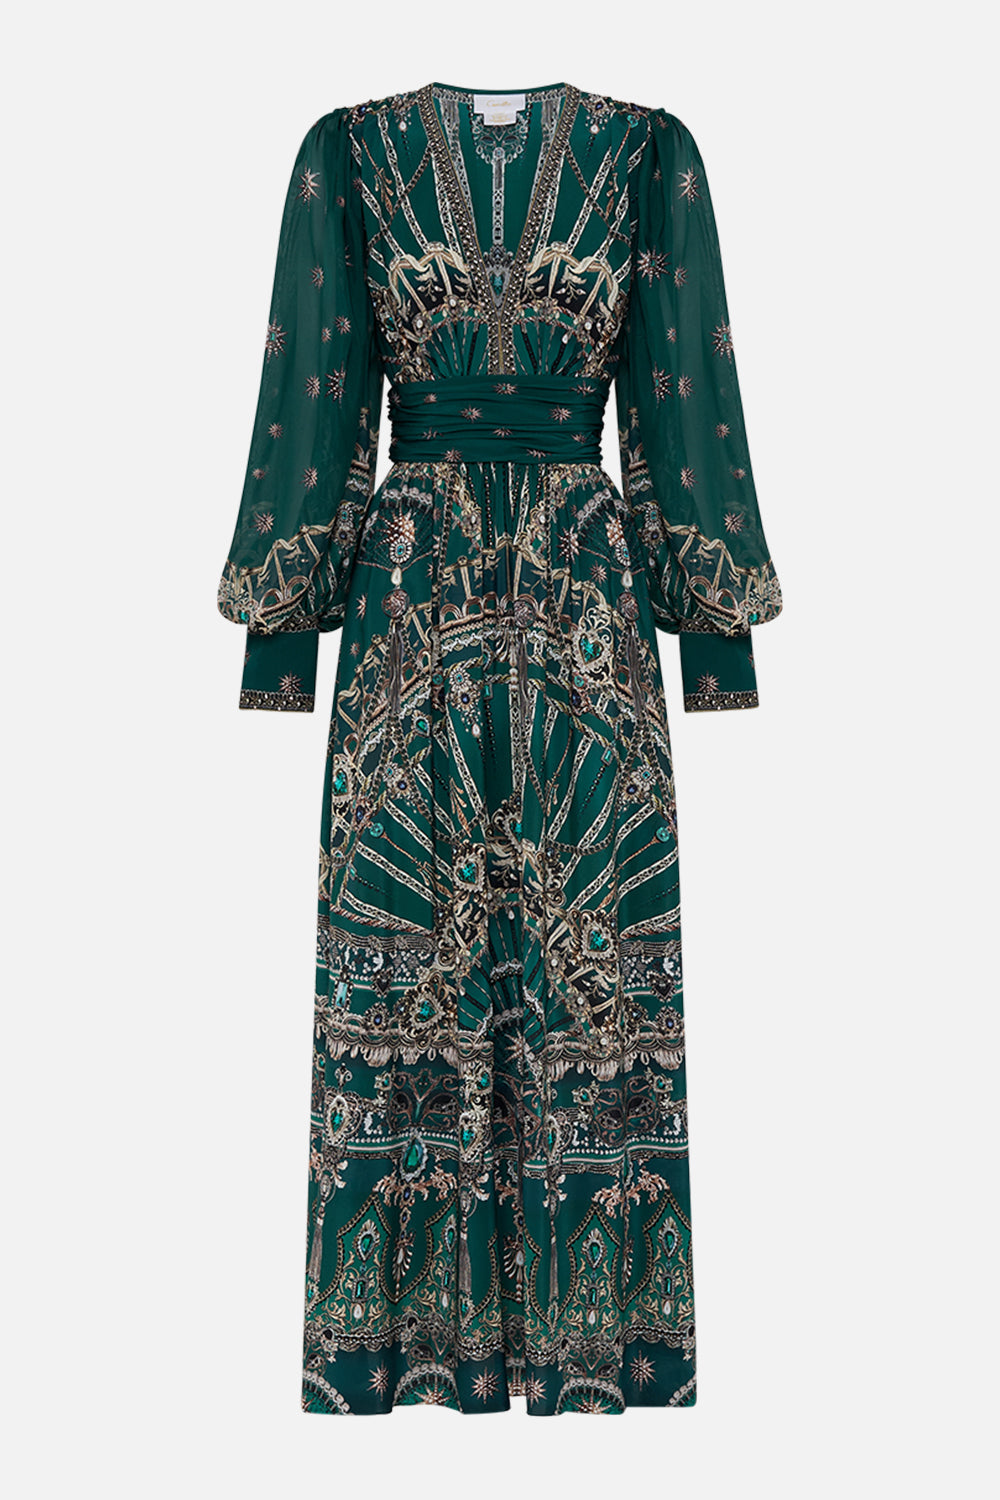 Product view of CAMILLA Long Silk Dress in A Venice Veil print